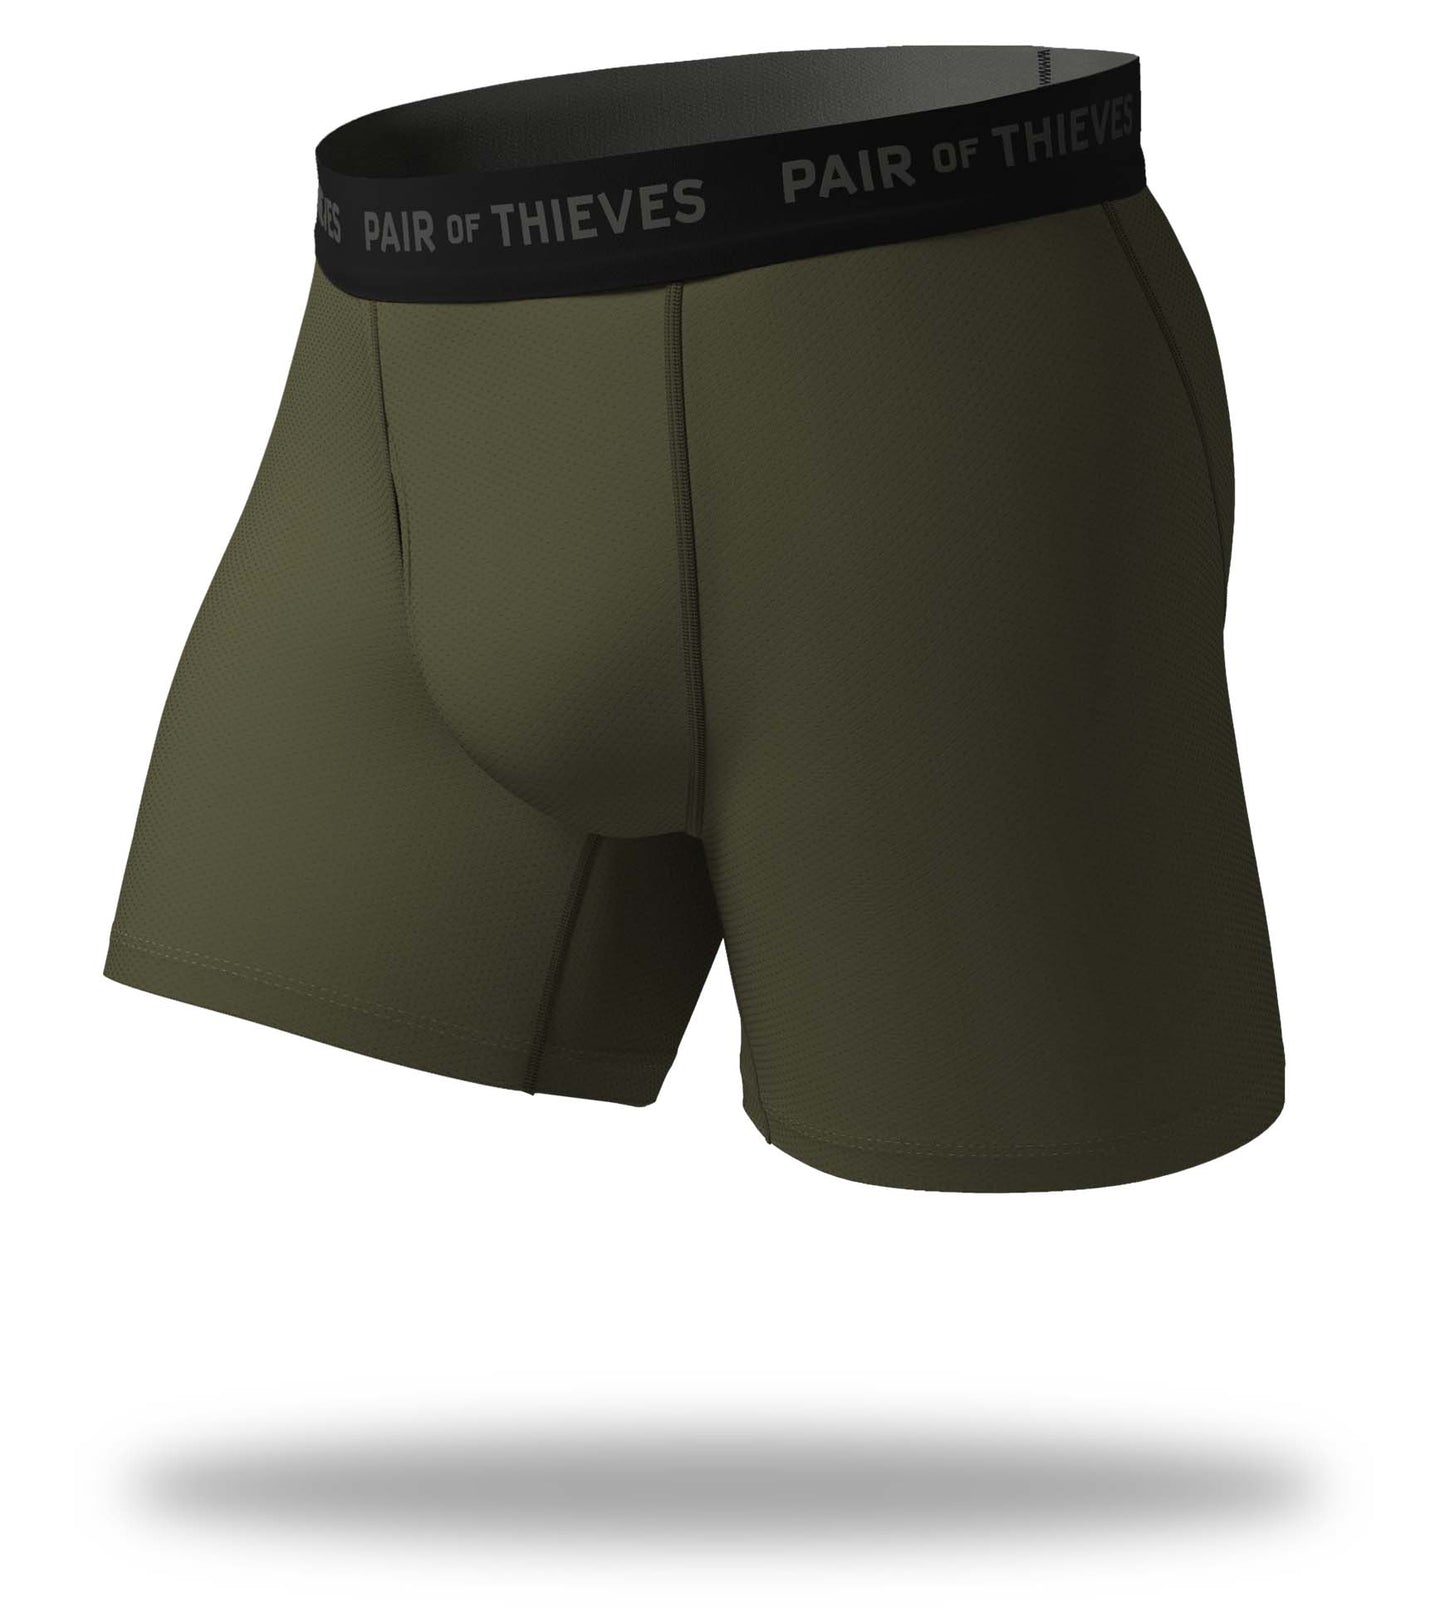 SuperFit Boxer Briefs, seaweed green with grey logo on black waistband